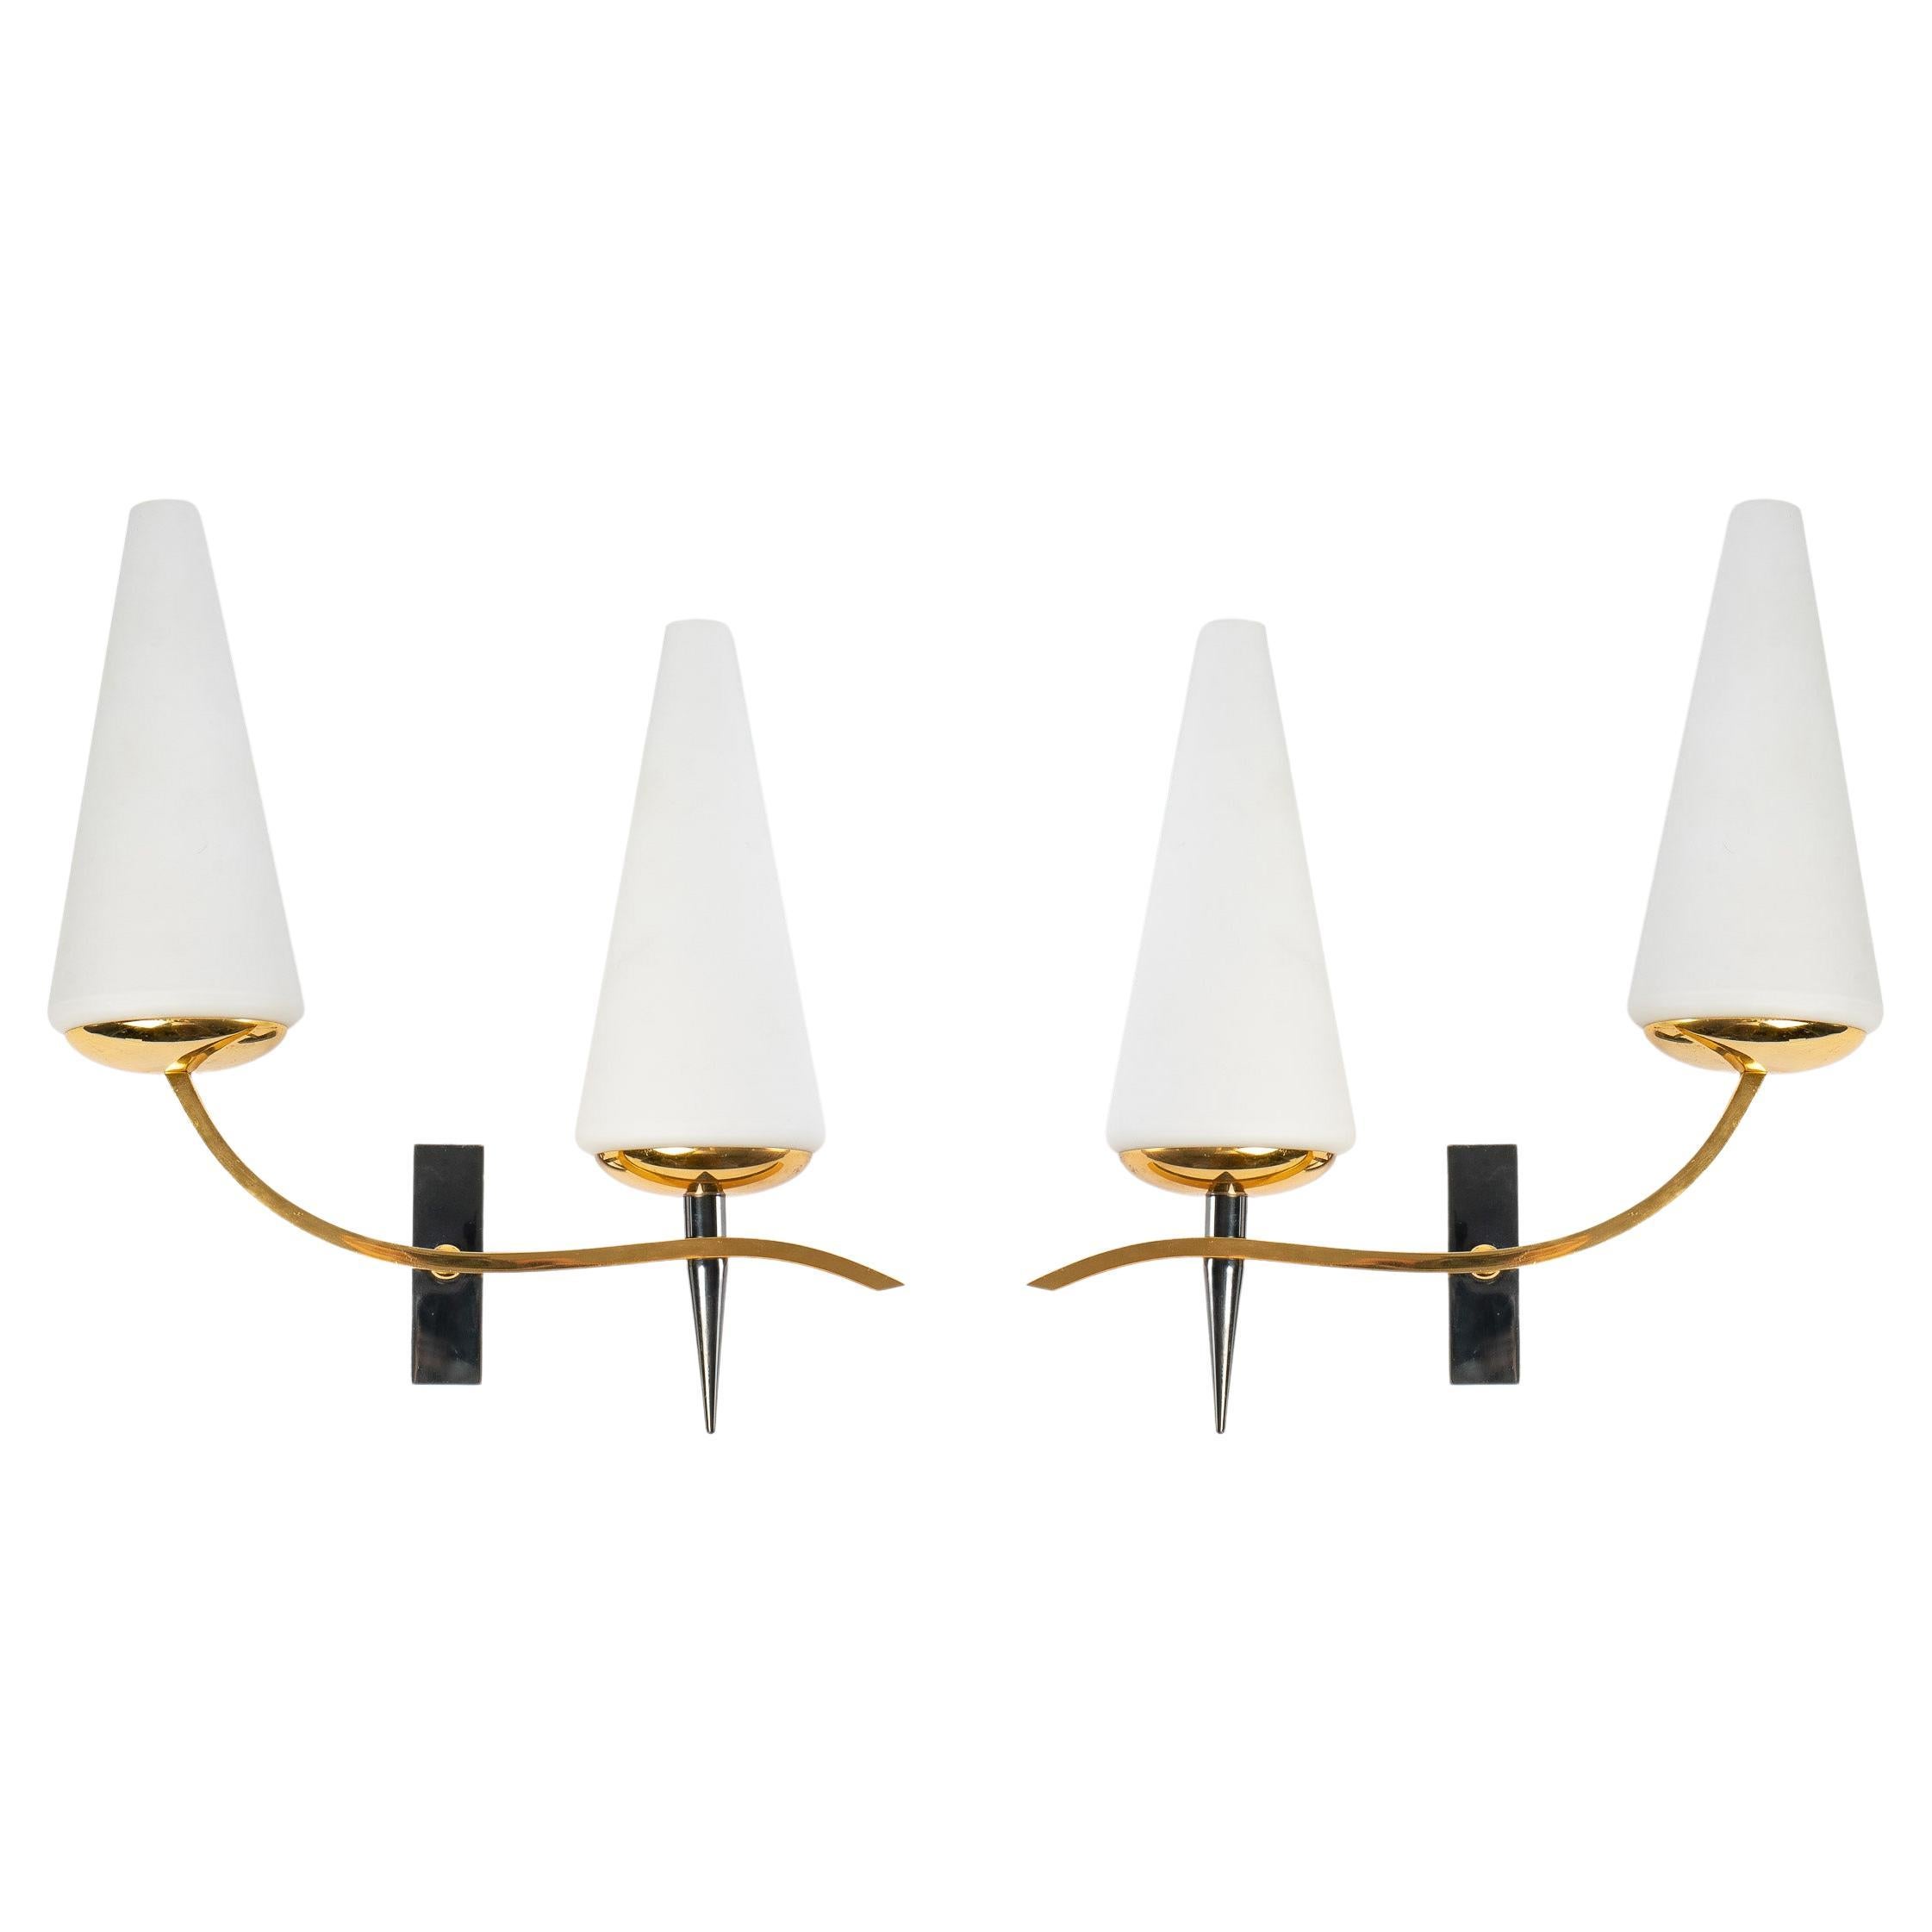 1950 Pair of Assymetrical Sconces by the Maison Arlus For Sale